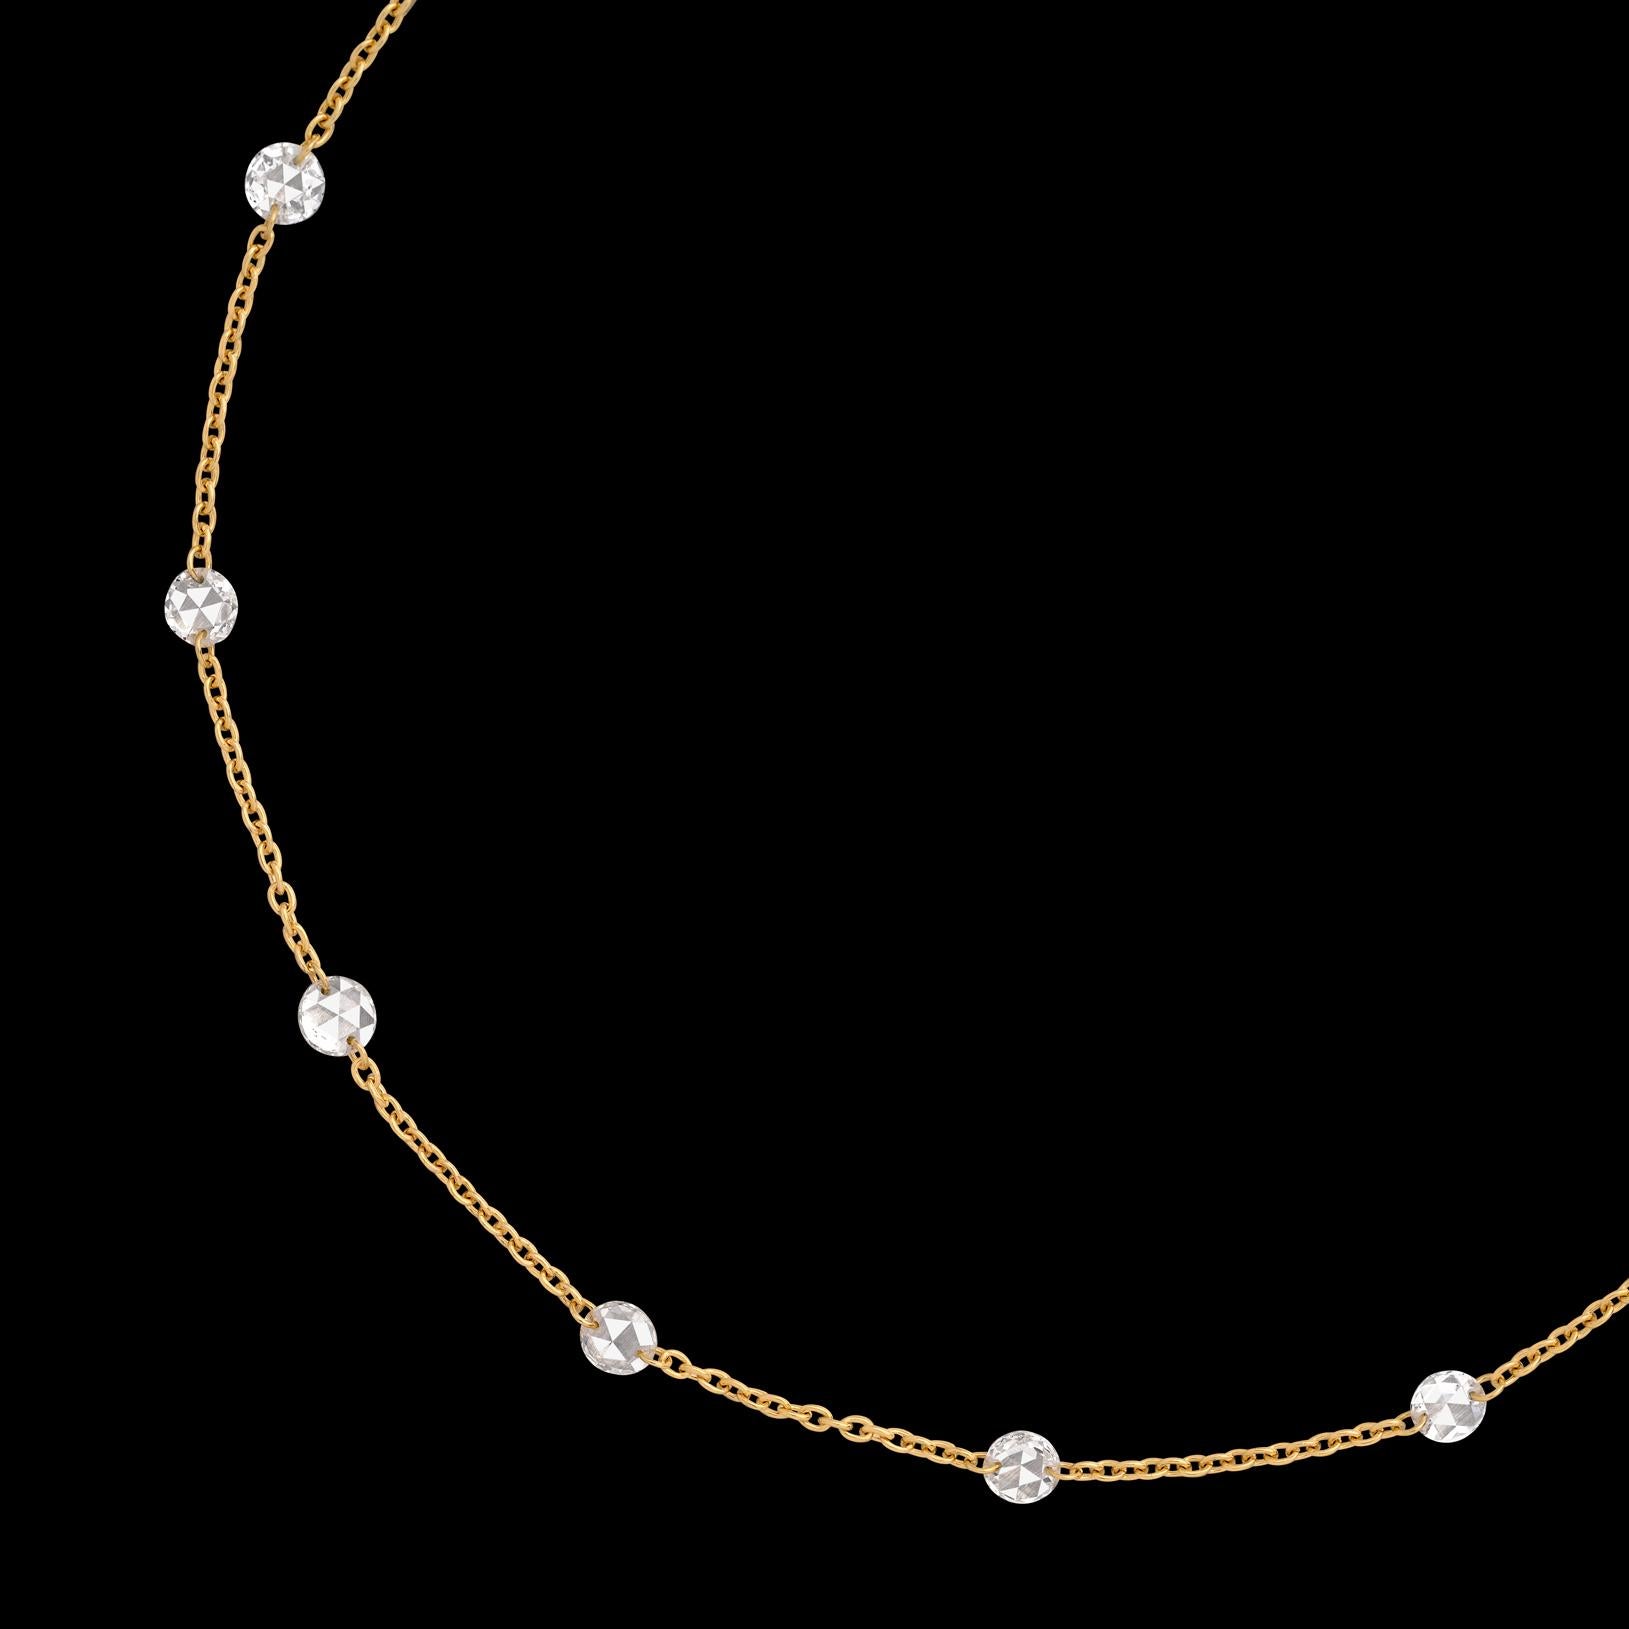 Your new favorite necklace! This 18 karat yellow gold beauty features 25 fine cut round diamonds weighing a total of 1.65 carats. These unique, multi-faceted diamonds have been drilled through so that the gold chain is woven directly between the